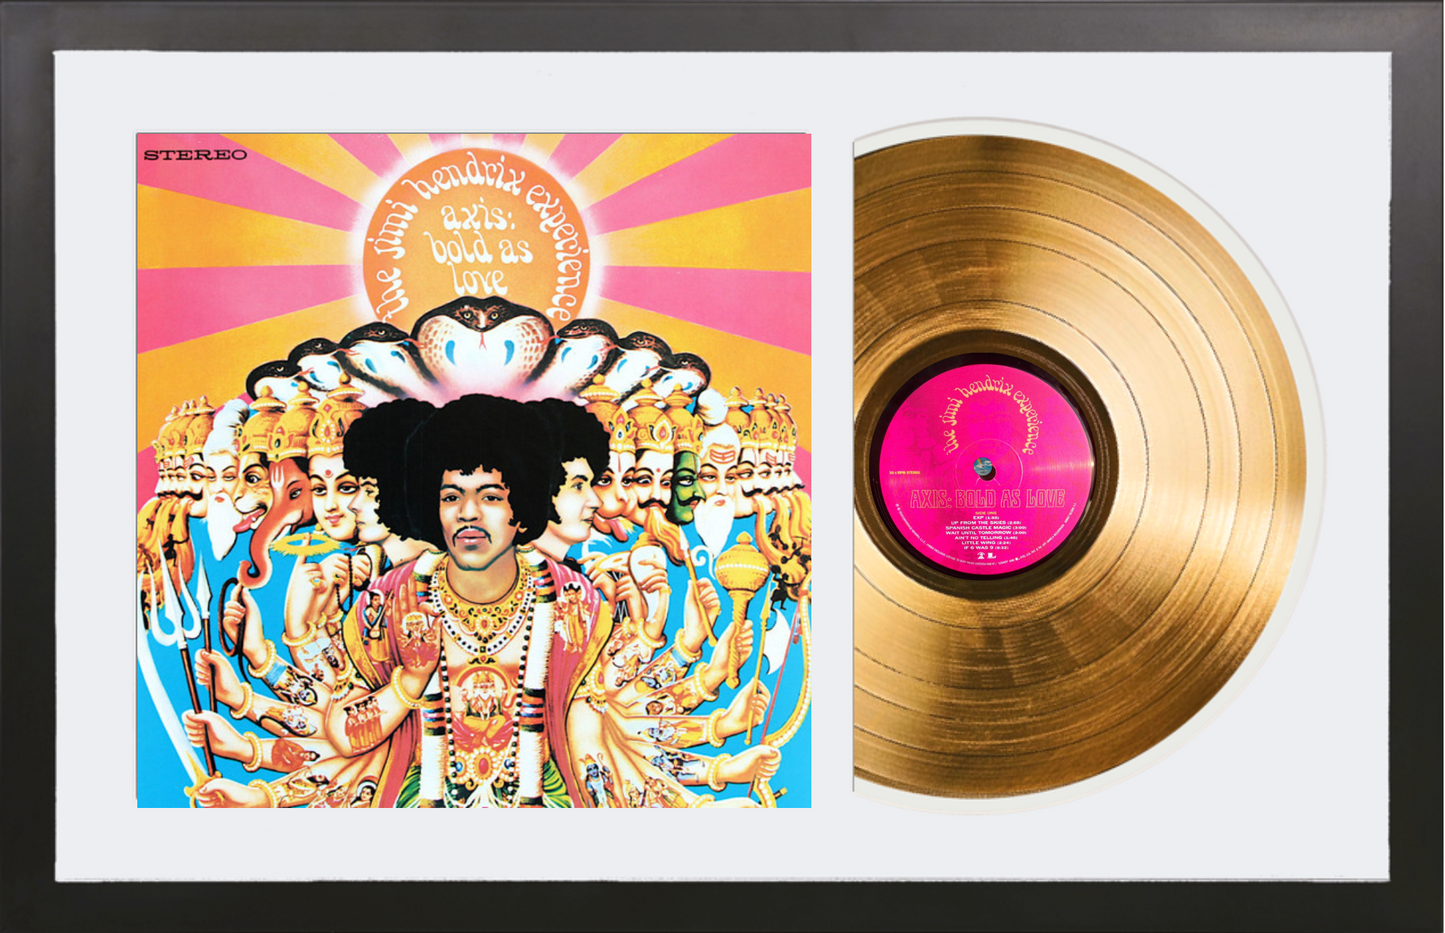 Jimi Hendrix - Axis: Bold As Love - 14K Gold Plated, Limited Edition Album